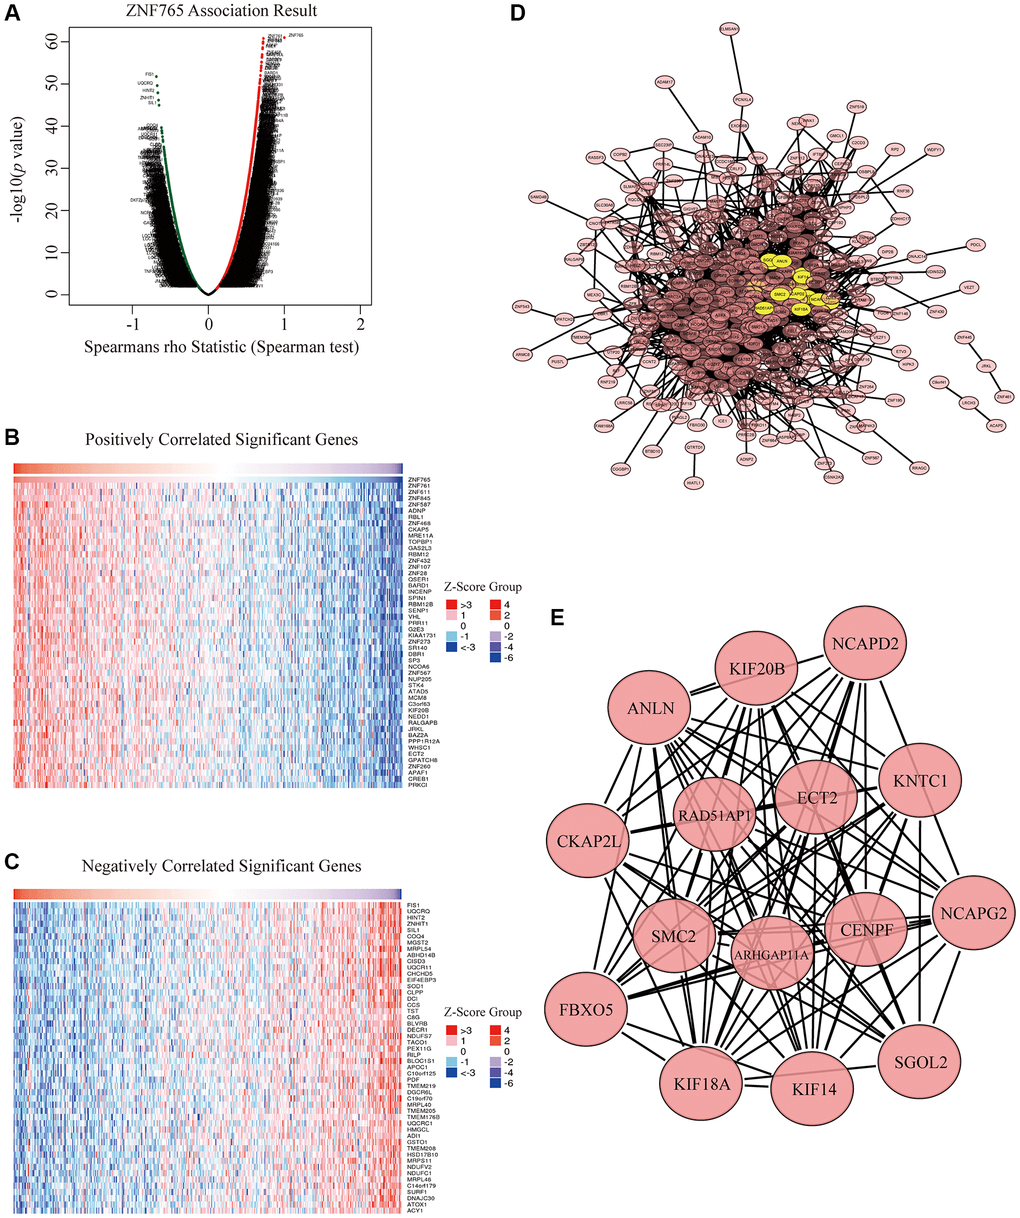 Co-expression genes and protein-protein interaction (PPI) network of ZNF765 in HCC. (A) A correlation analysis was used to assess correlations between ZNF765 and genes differentially expressed in HCC. Red shows positively correlated genes, and green indicates negatively correlated genes. False discovery rate, FDR B, C) Heat maps show genes positively and negatively correlated with ZNF765 in HCC (Top 50). (D) The most significant module selected by the MCODE plugin (degree cut-off = 2, node score cut-off = 0.2, k-core = 2, and max. Depth = 100). (E) Hub genes.